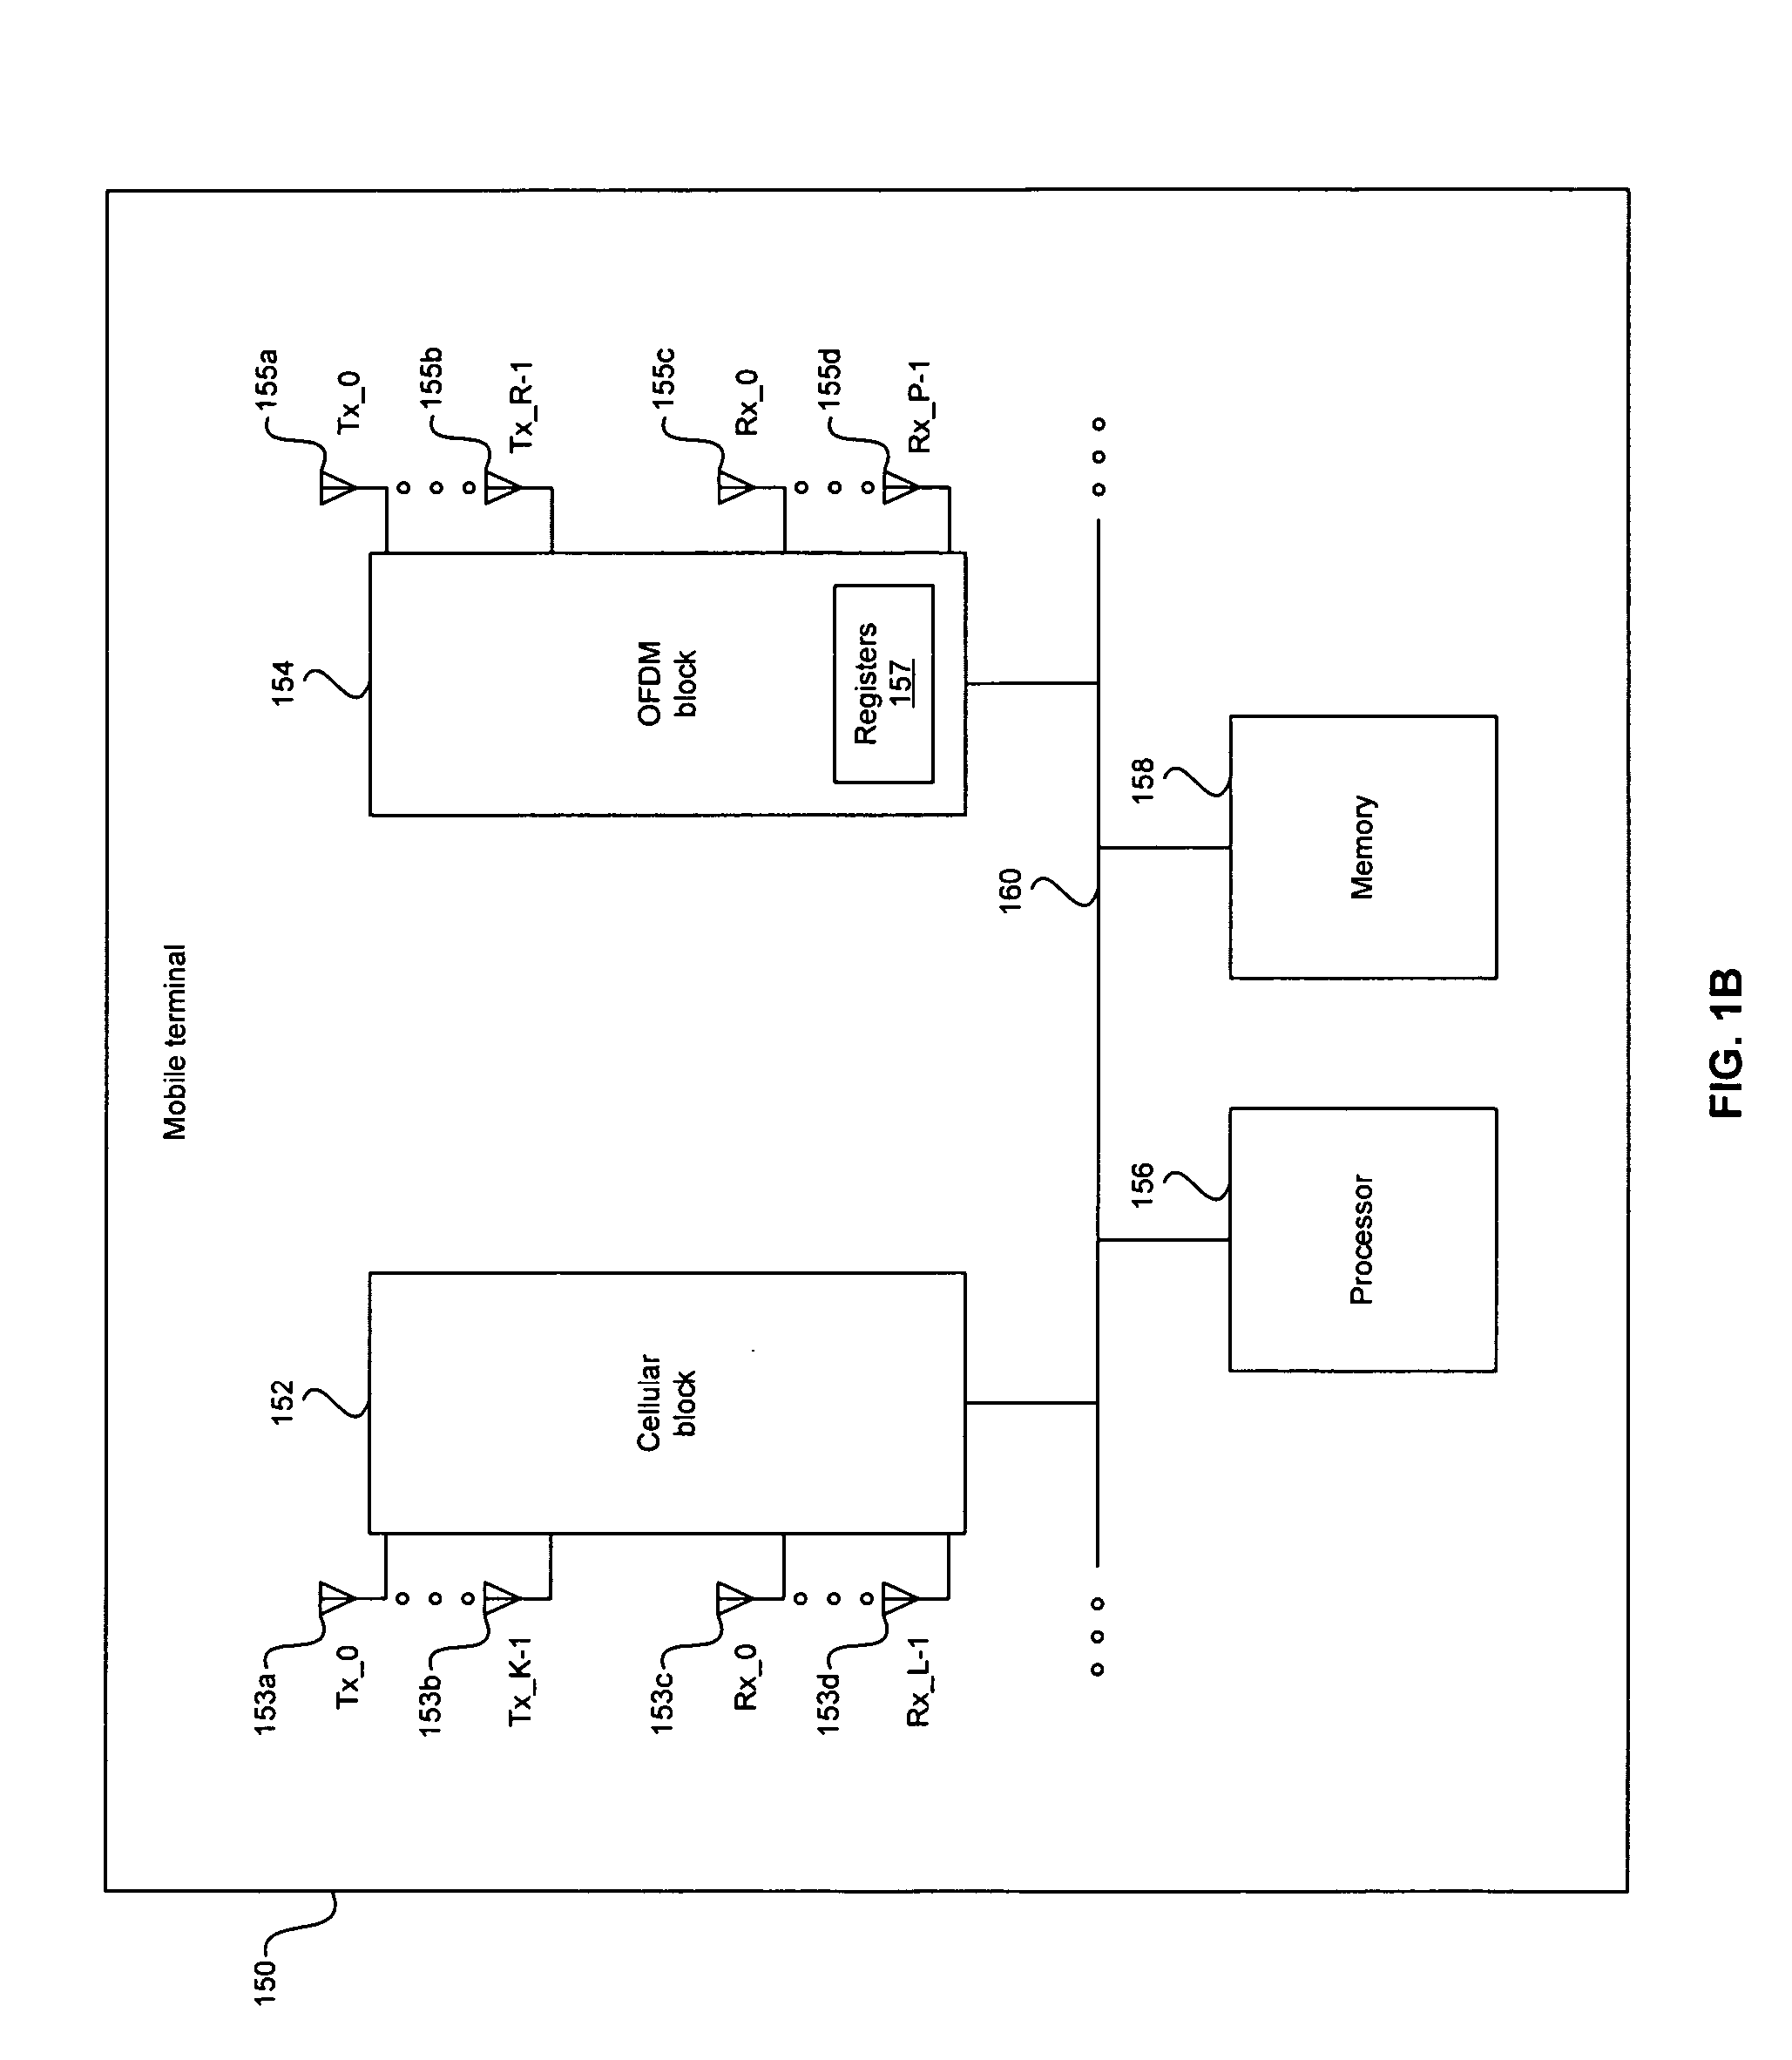 Method and system for increasing data rate in a mobile terminal using spatial multiplexing for DVB-H communication